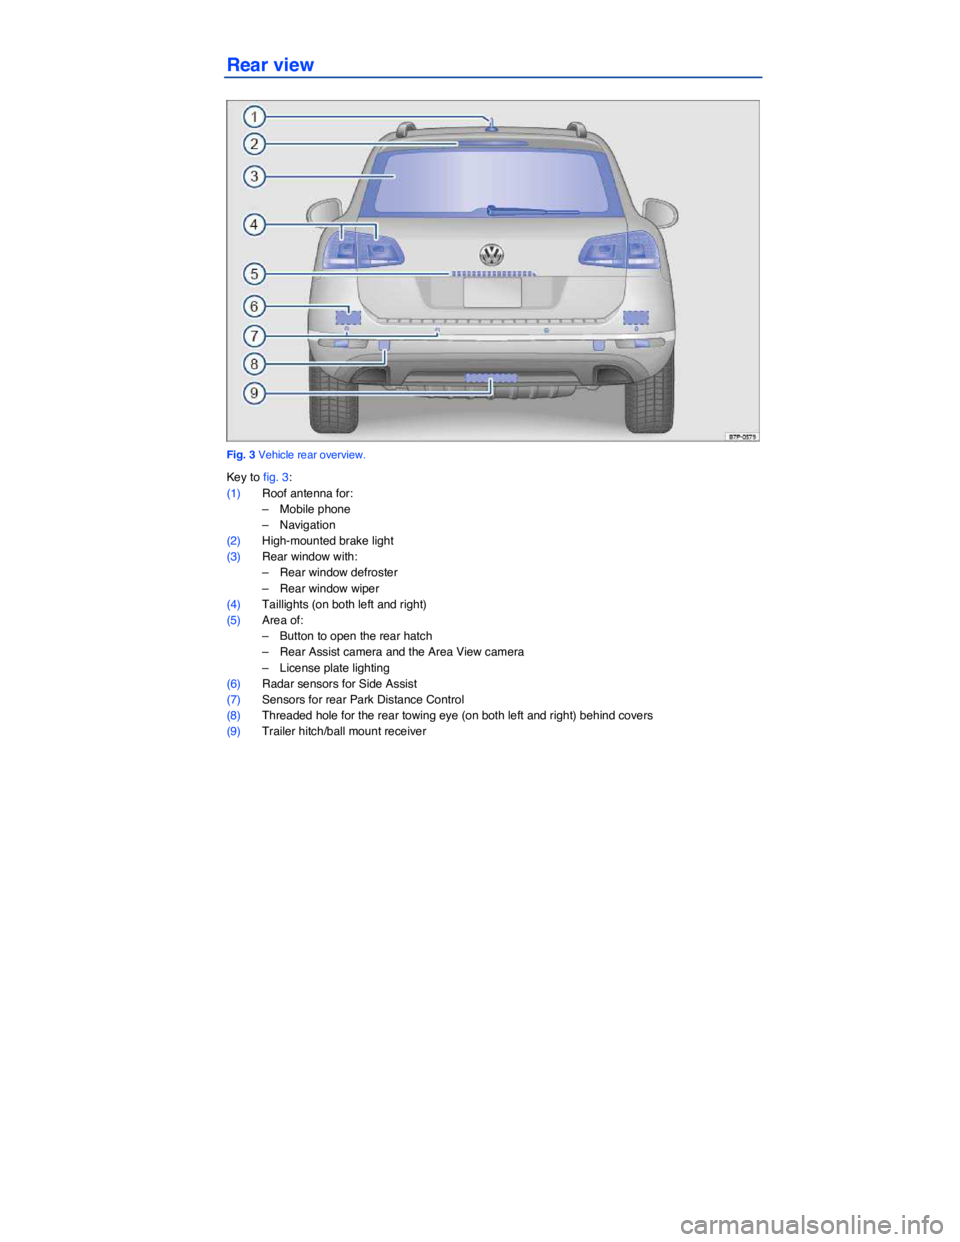 VOLKSWAGEN TOUAREG 2010  Owners Manual  
Rear view 
 
Fig. 3 Vehicle rear overview. 
Key to fig. 3: 
(1) Roof antenna for:  
–  Mobile phone  
–  Navigation  
(2) High-mounted brake light  
(3) Rear window with: 
–  Rear window defro